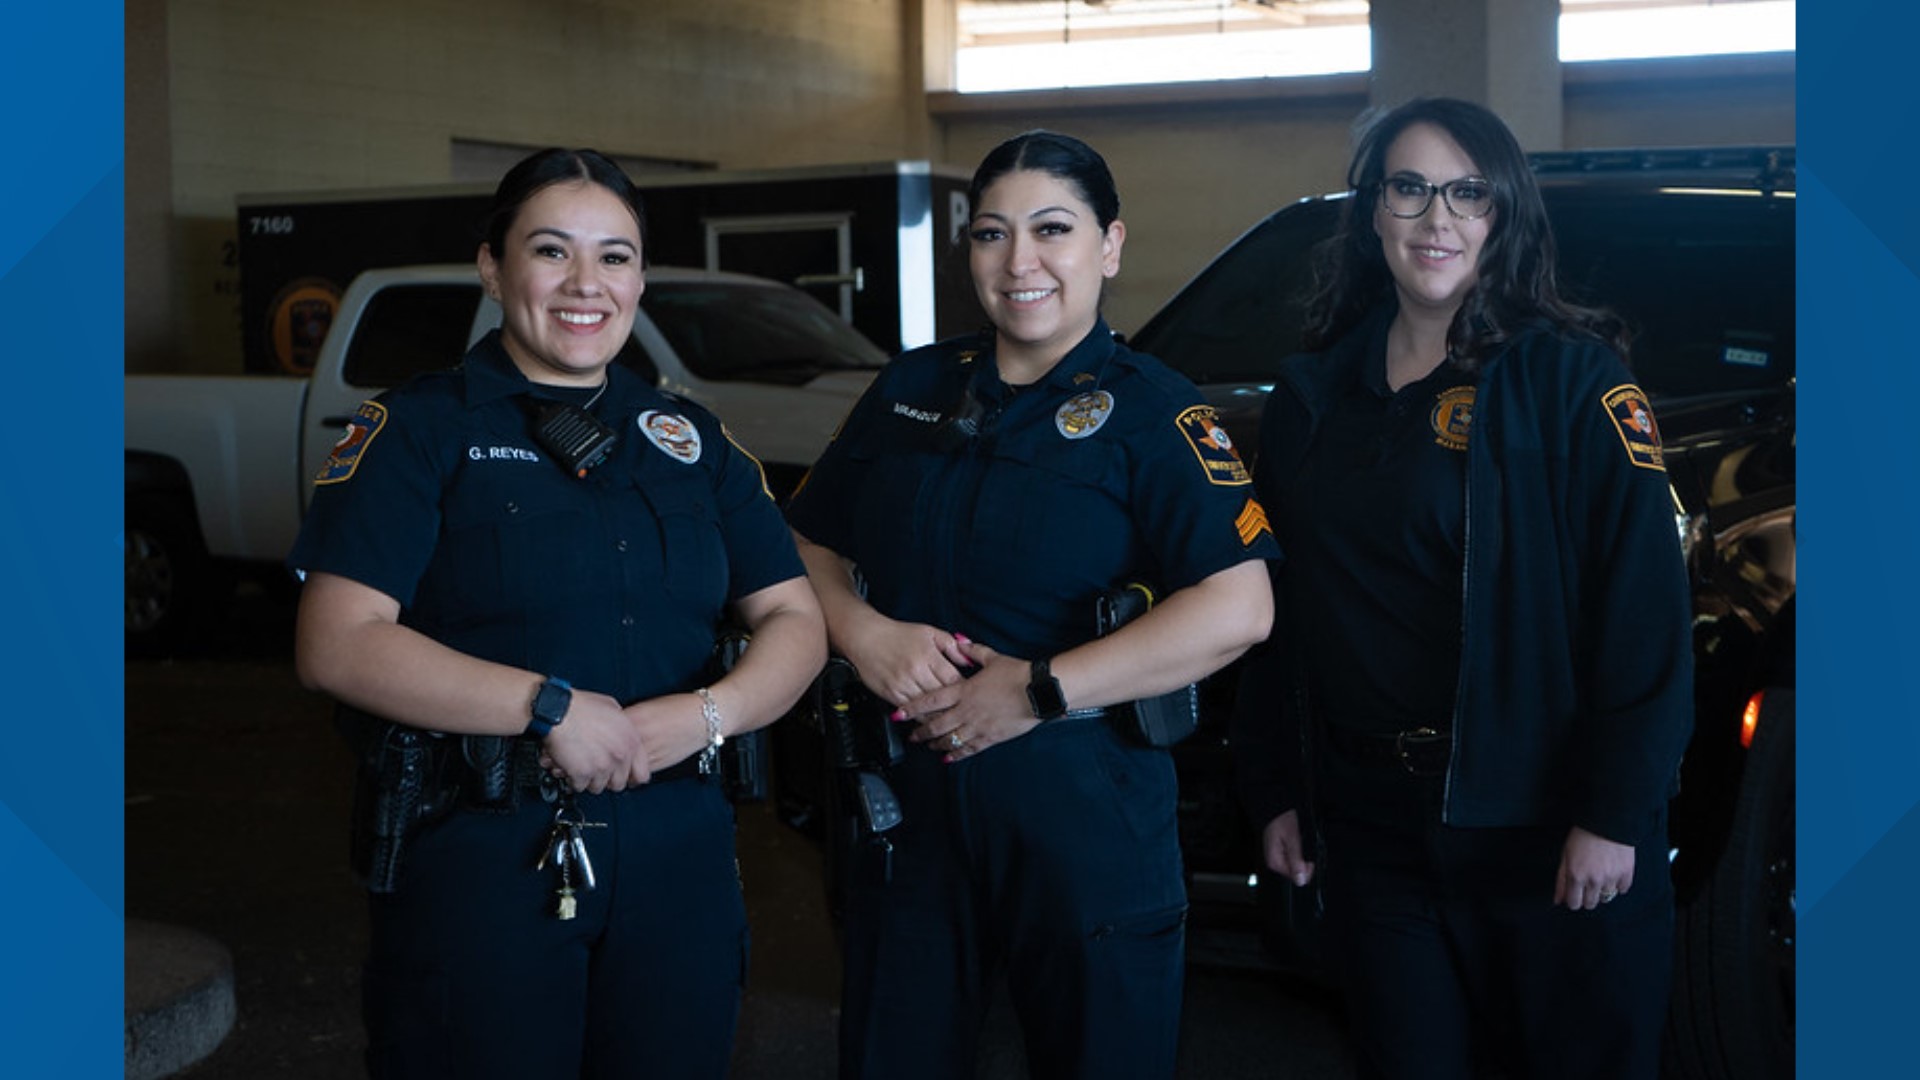 Officer Georgia Reyes also won Officer of the Month in February throughout the UT system, which includes 15 departments. She also works on an all-female shift.